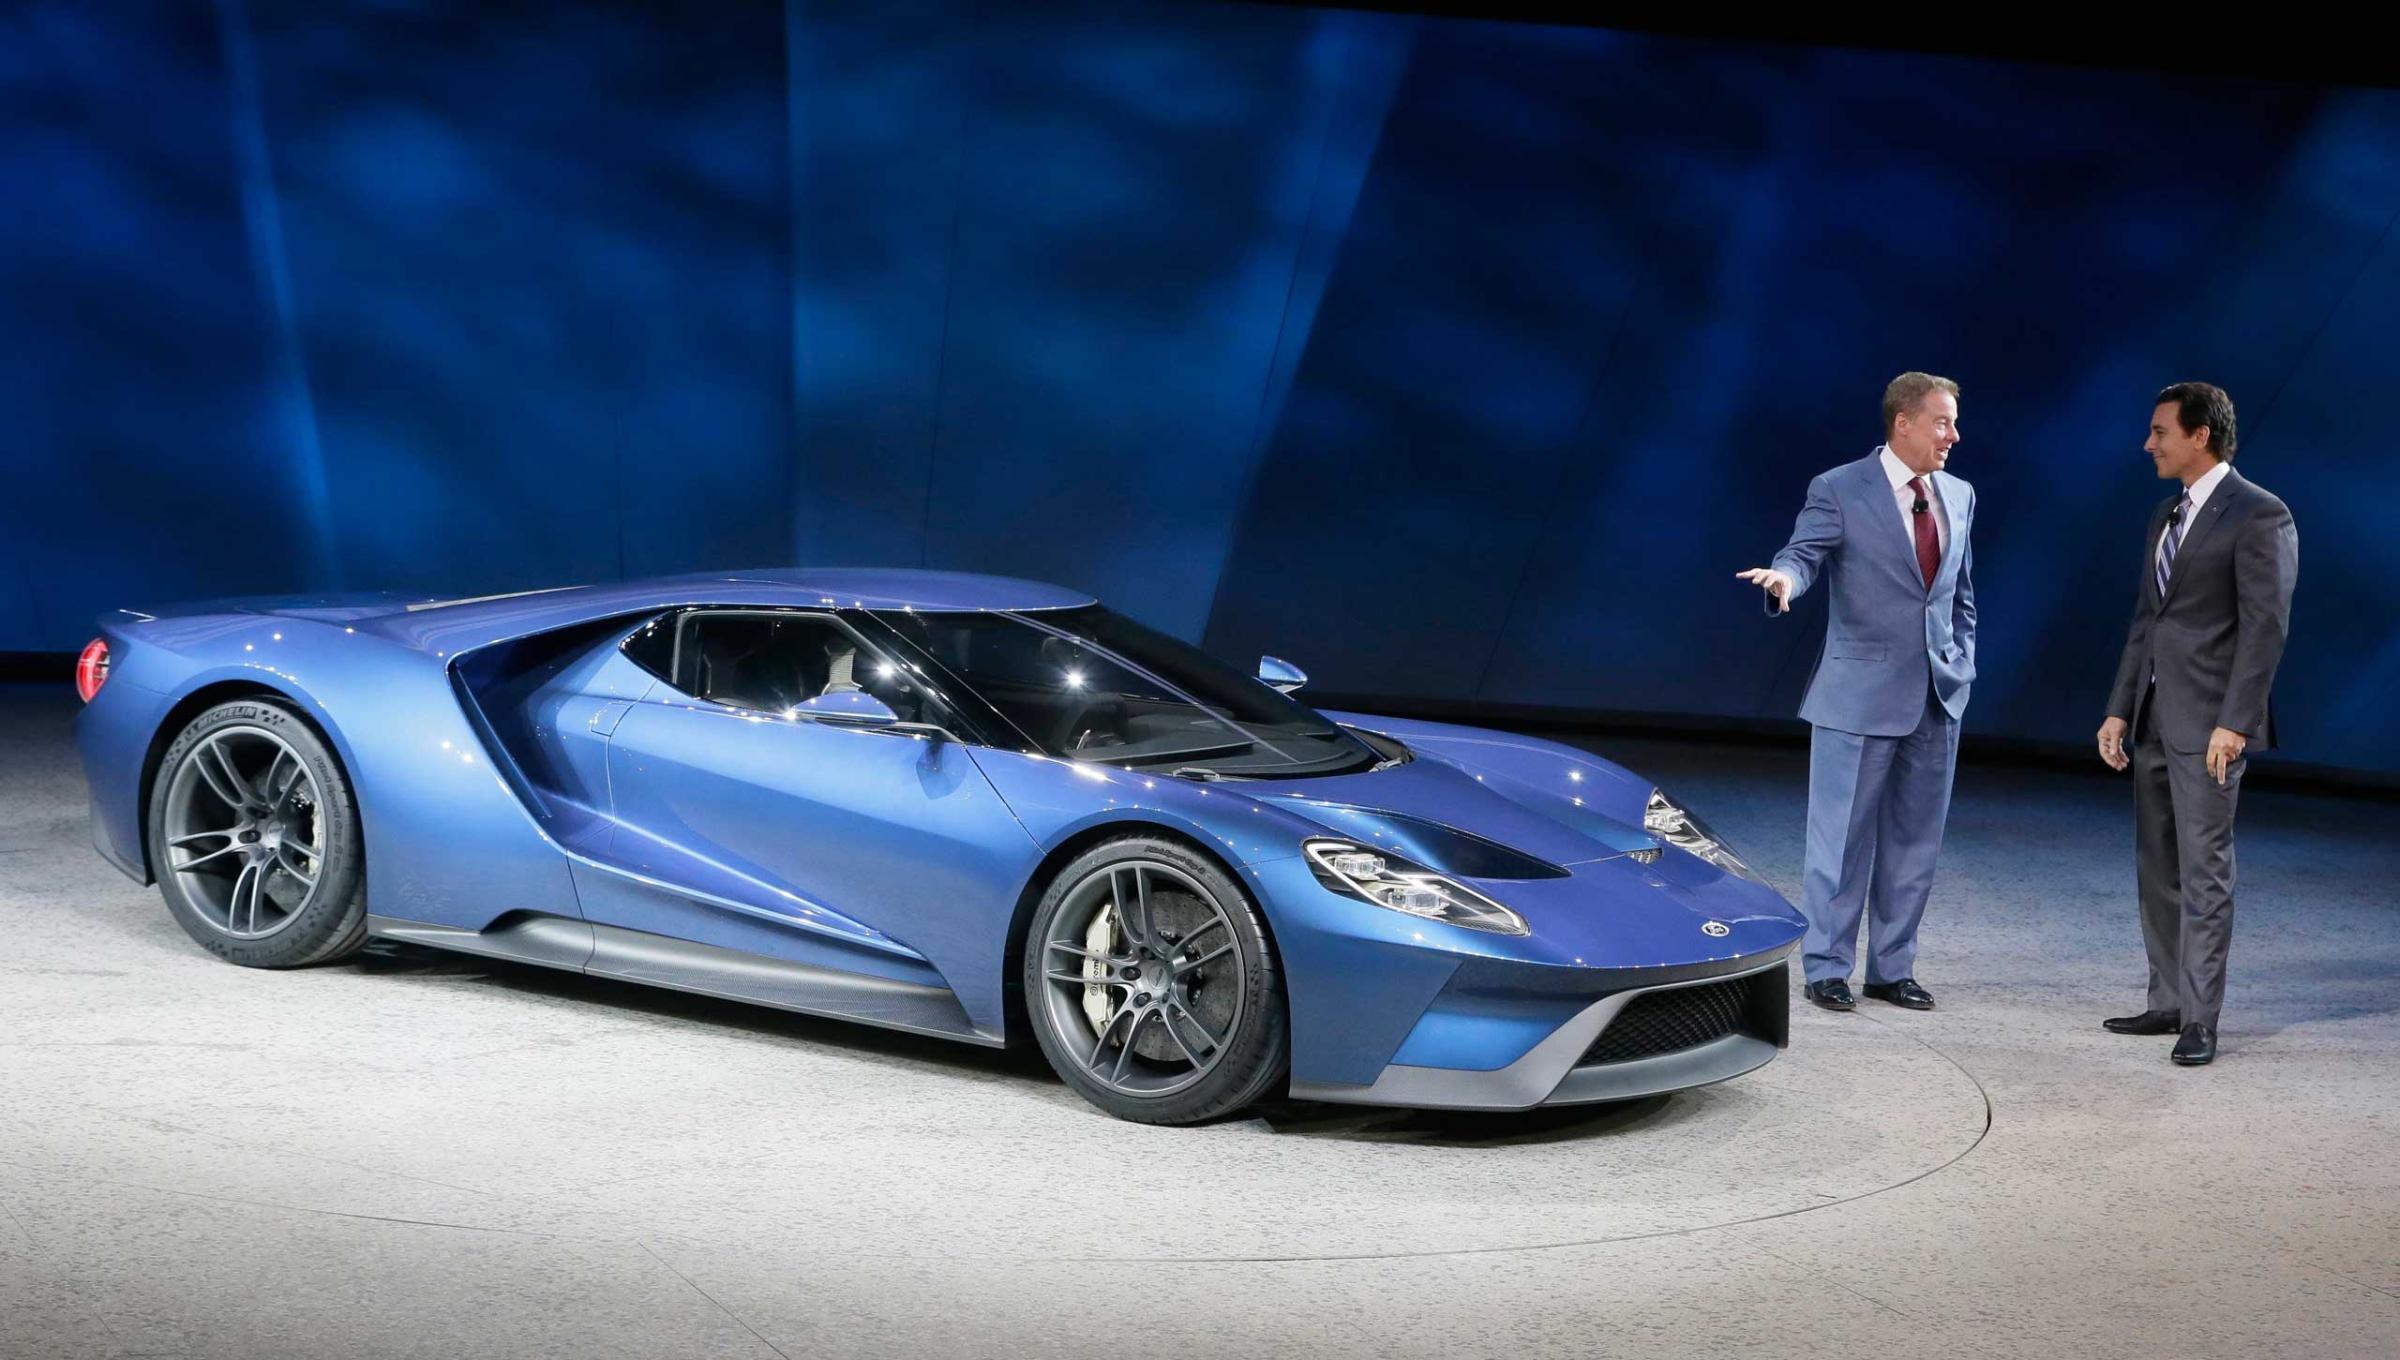 Ford Motor Co., Executive Chairman Bill Ford, left, and President and COO Mark Fields stand next to the new Ford GT on Jan. 12, 2015 in Detroit.